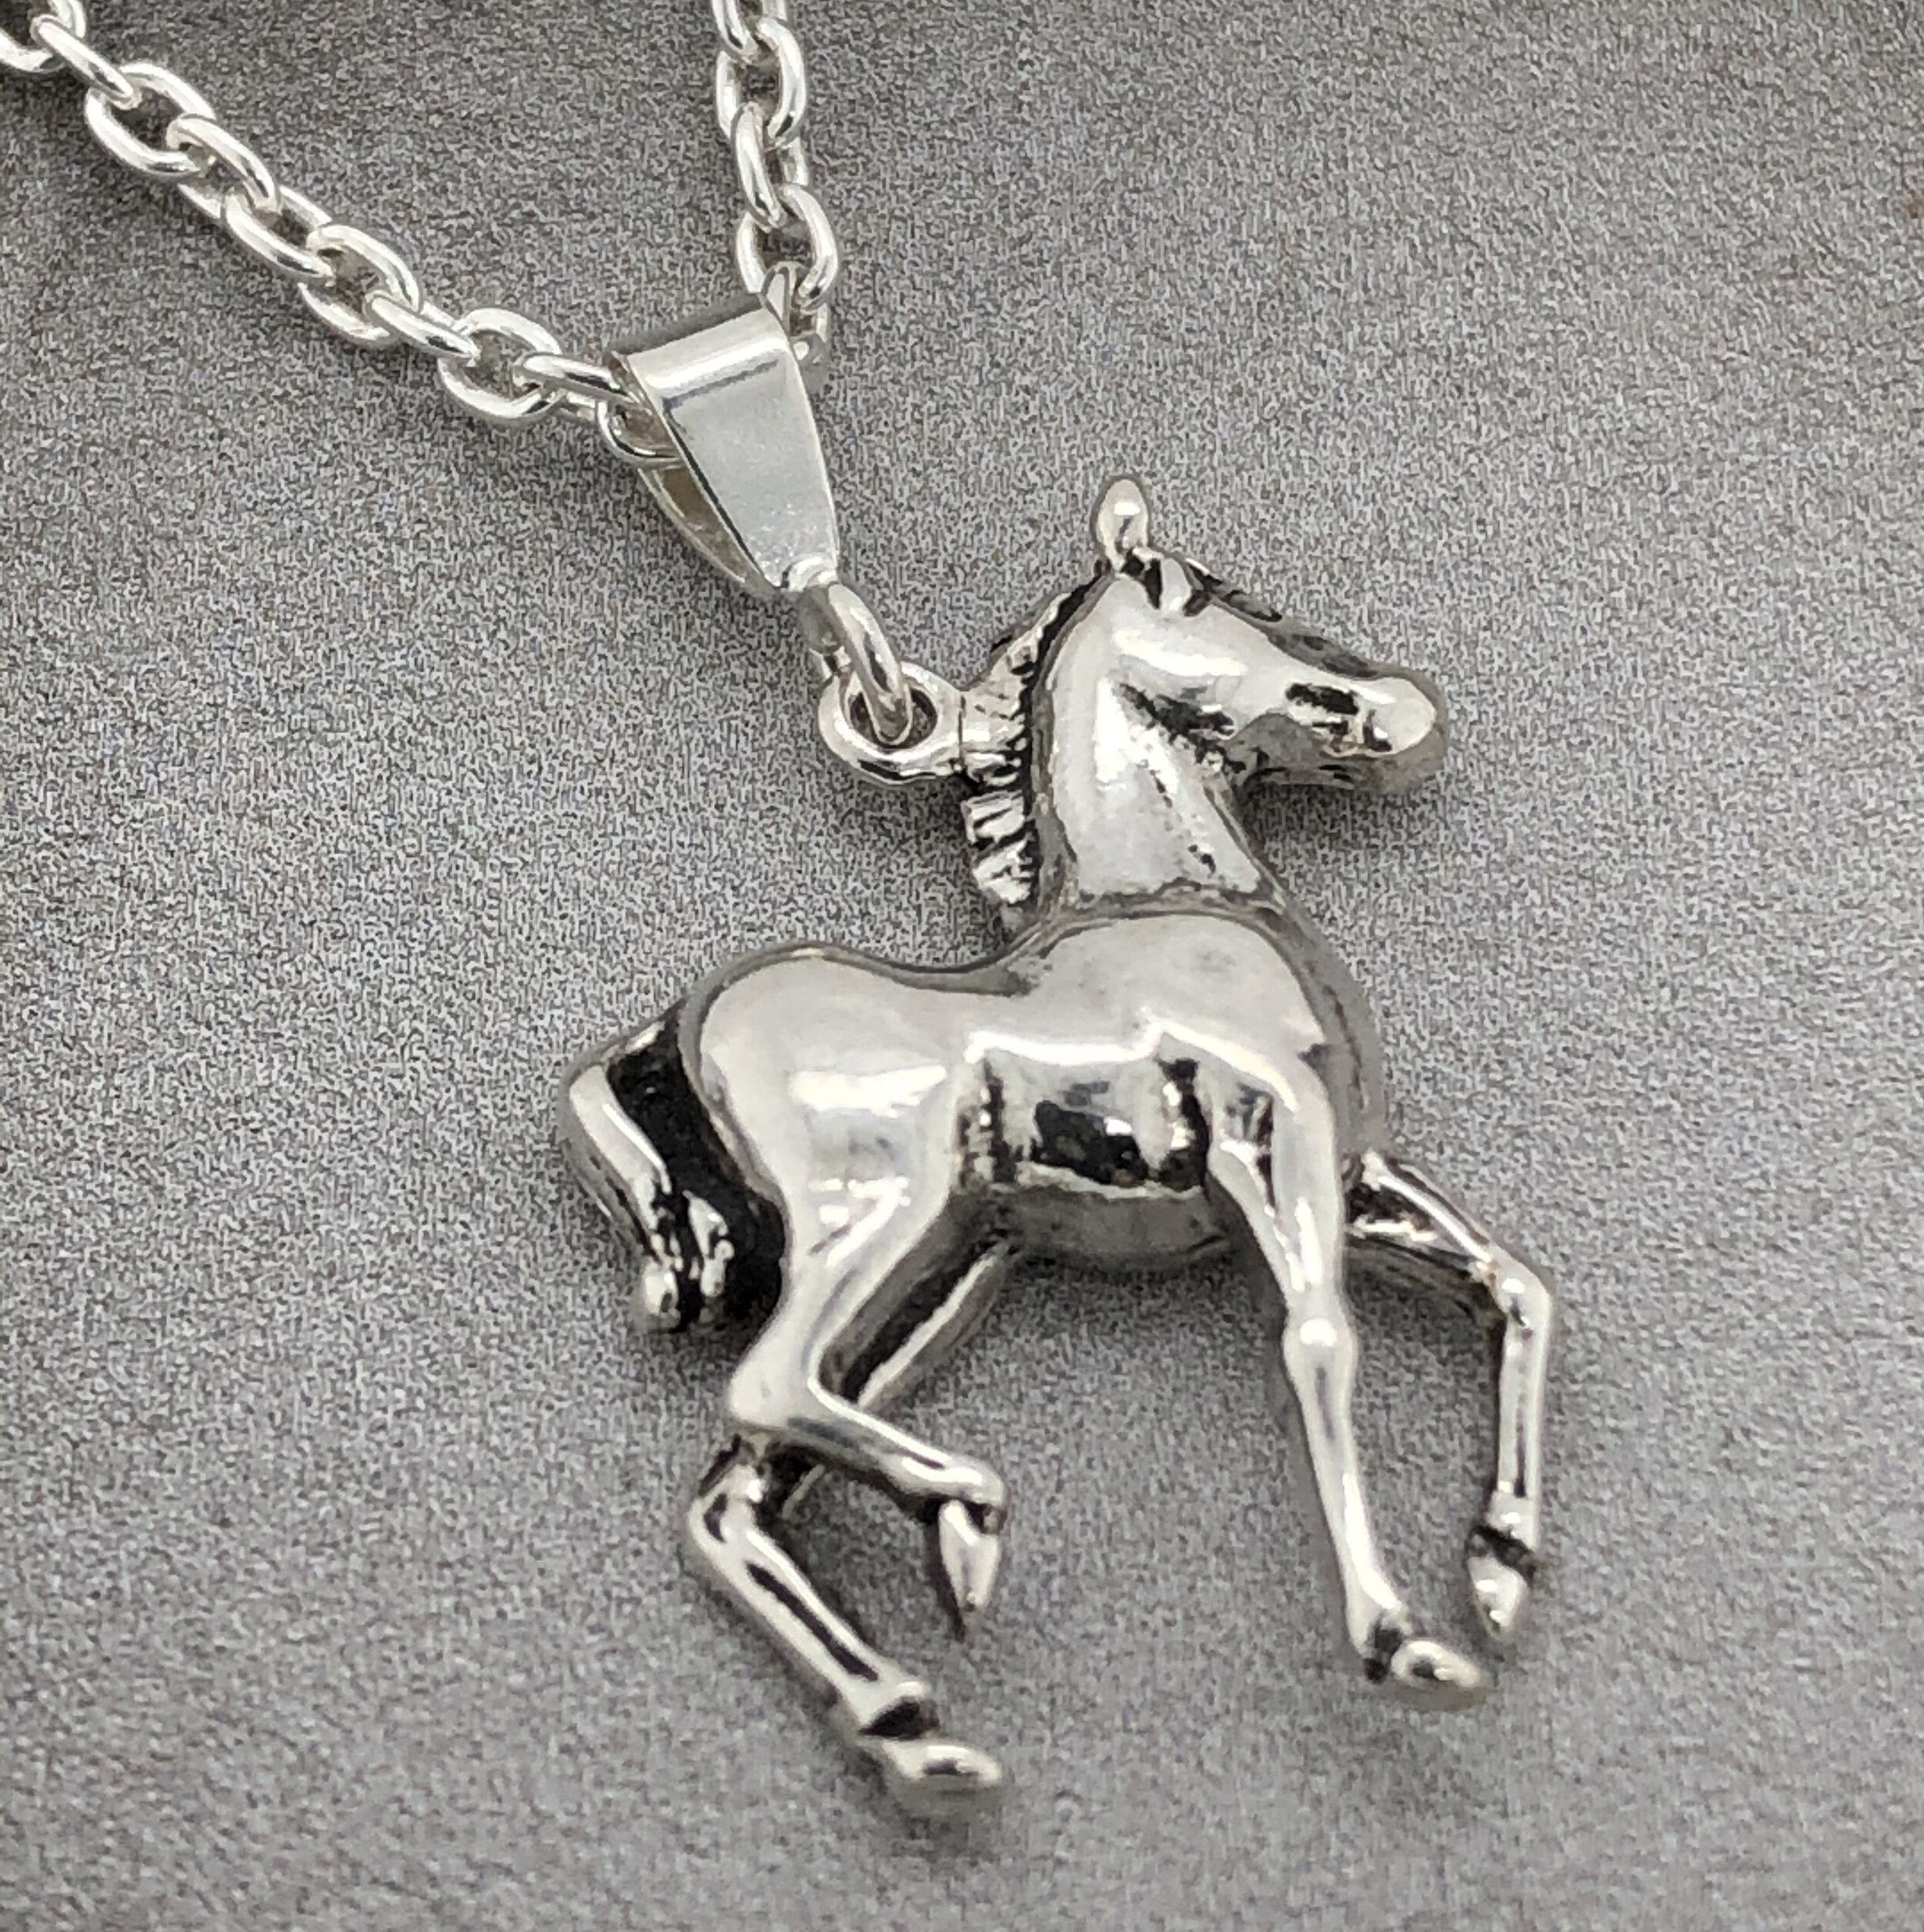 Details about   Equestrian Horseback Rider Artisan Silver-Plate Glass Cabochon Pendant Necklace 